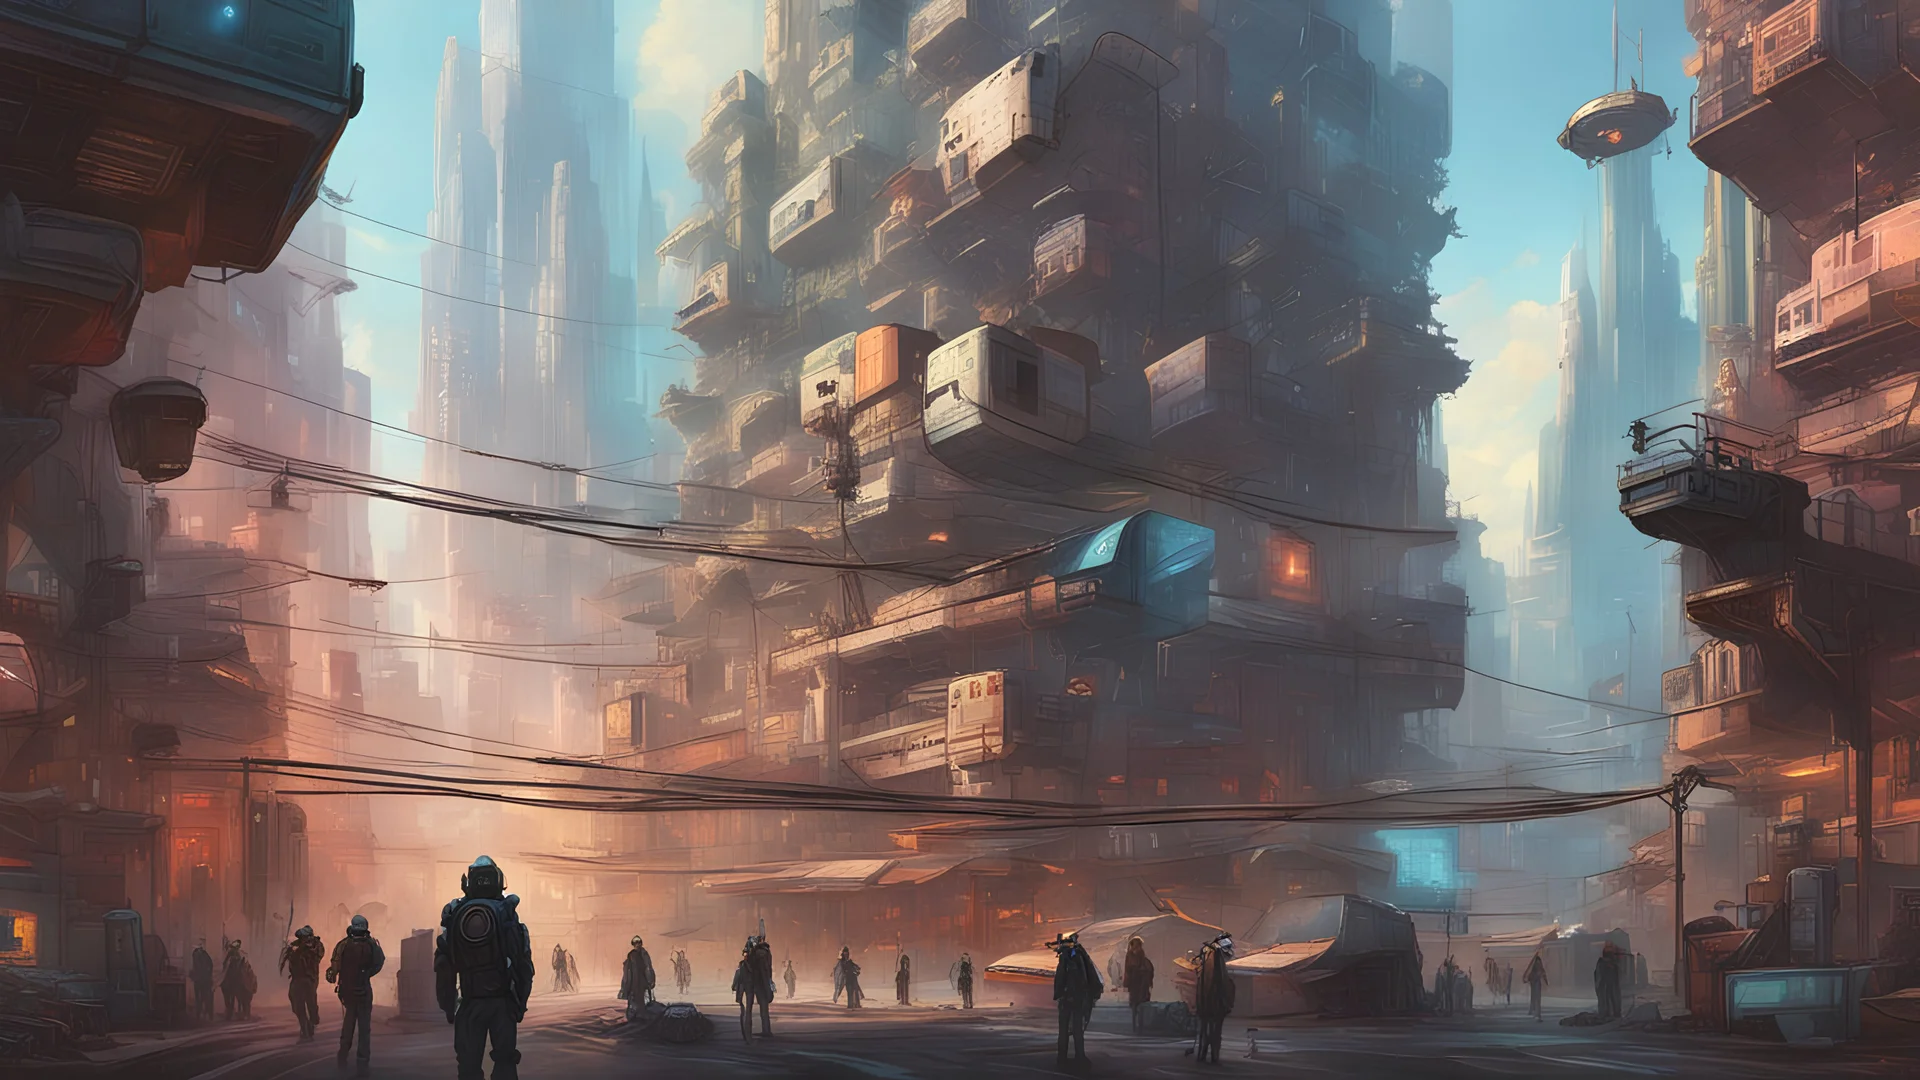 Dystopian futuristic City Dominated by Robots and Surveillance Cameras, Jordan Grimmer Style, very colorful, very detailed